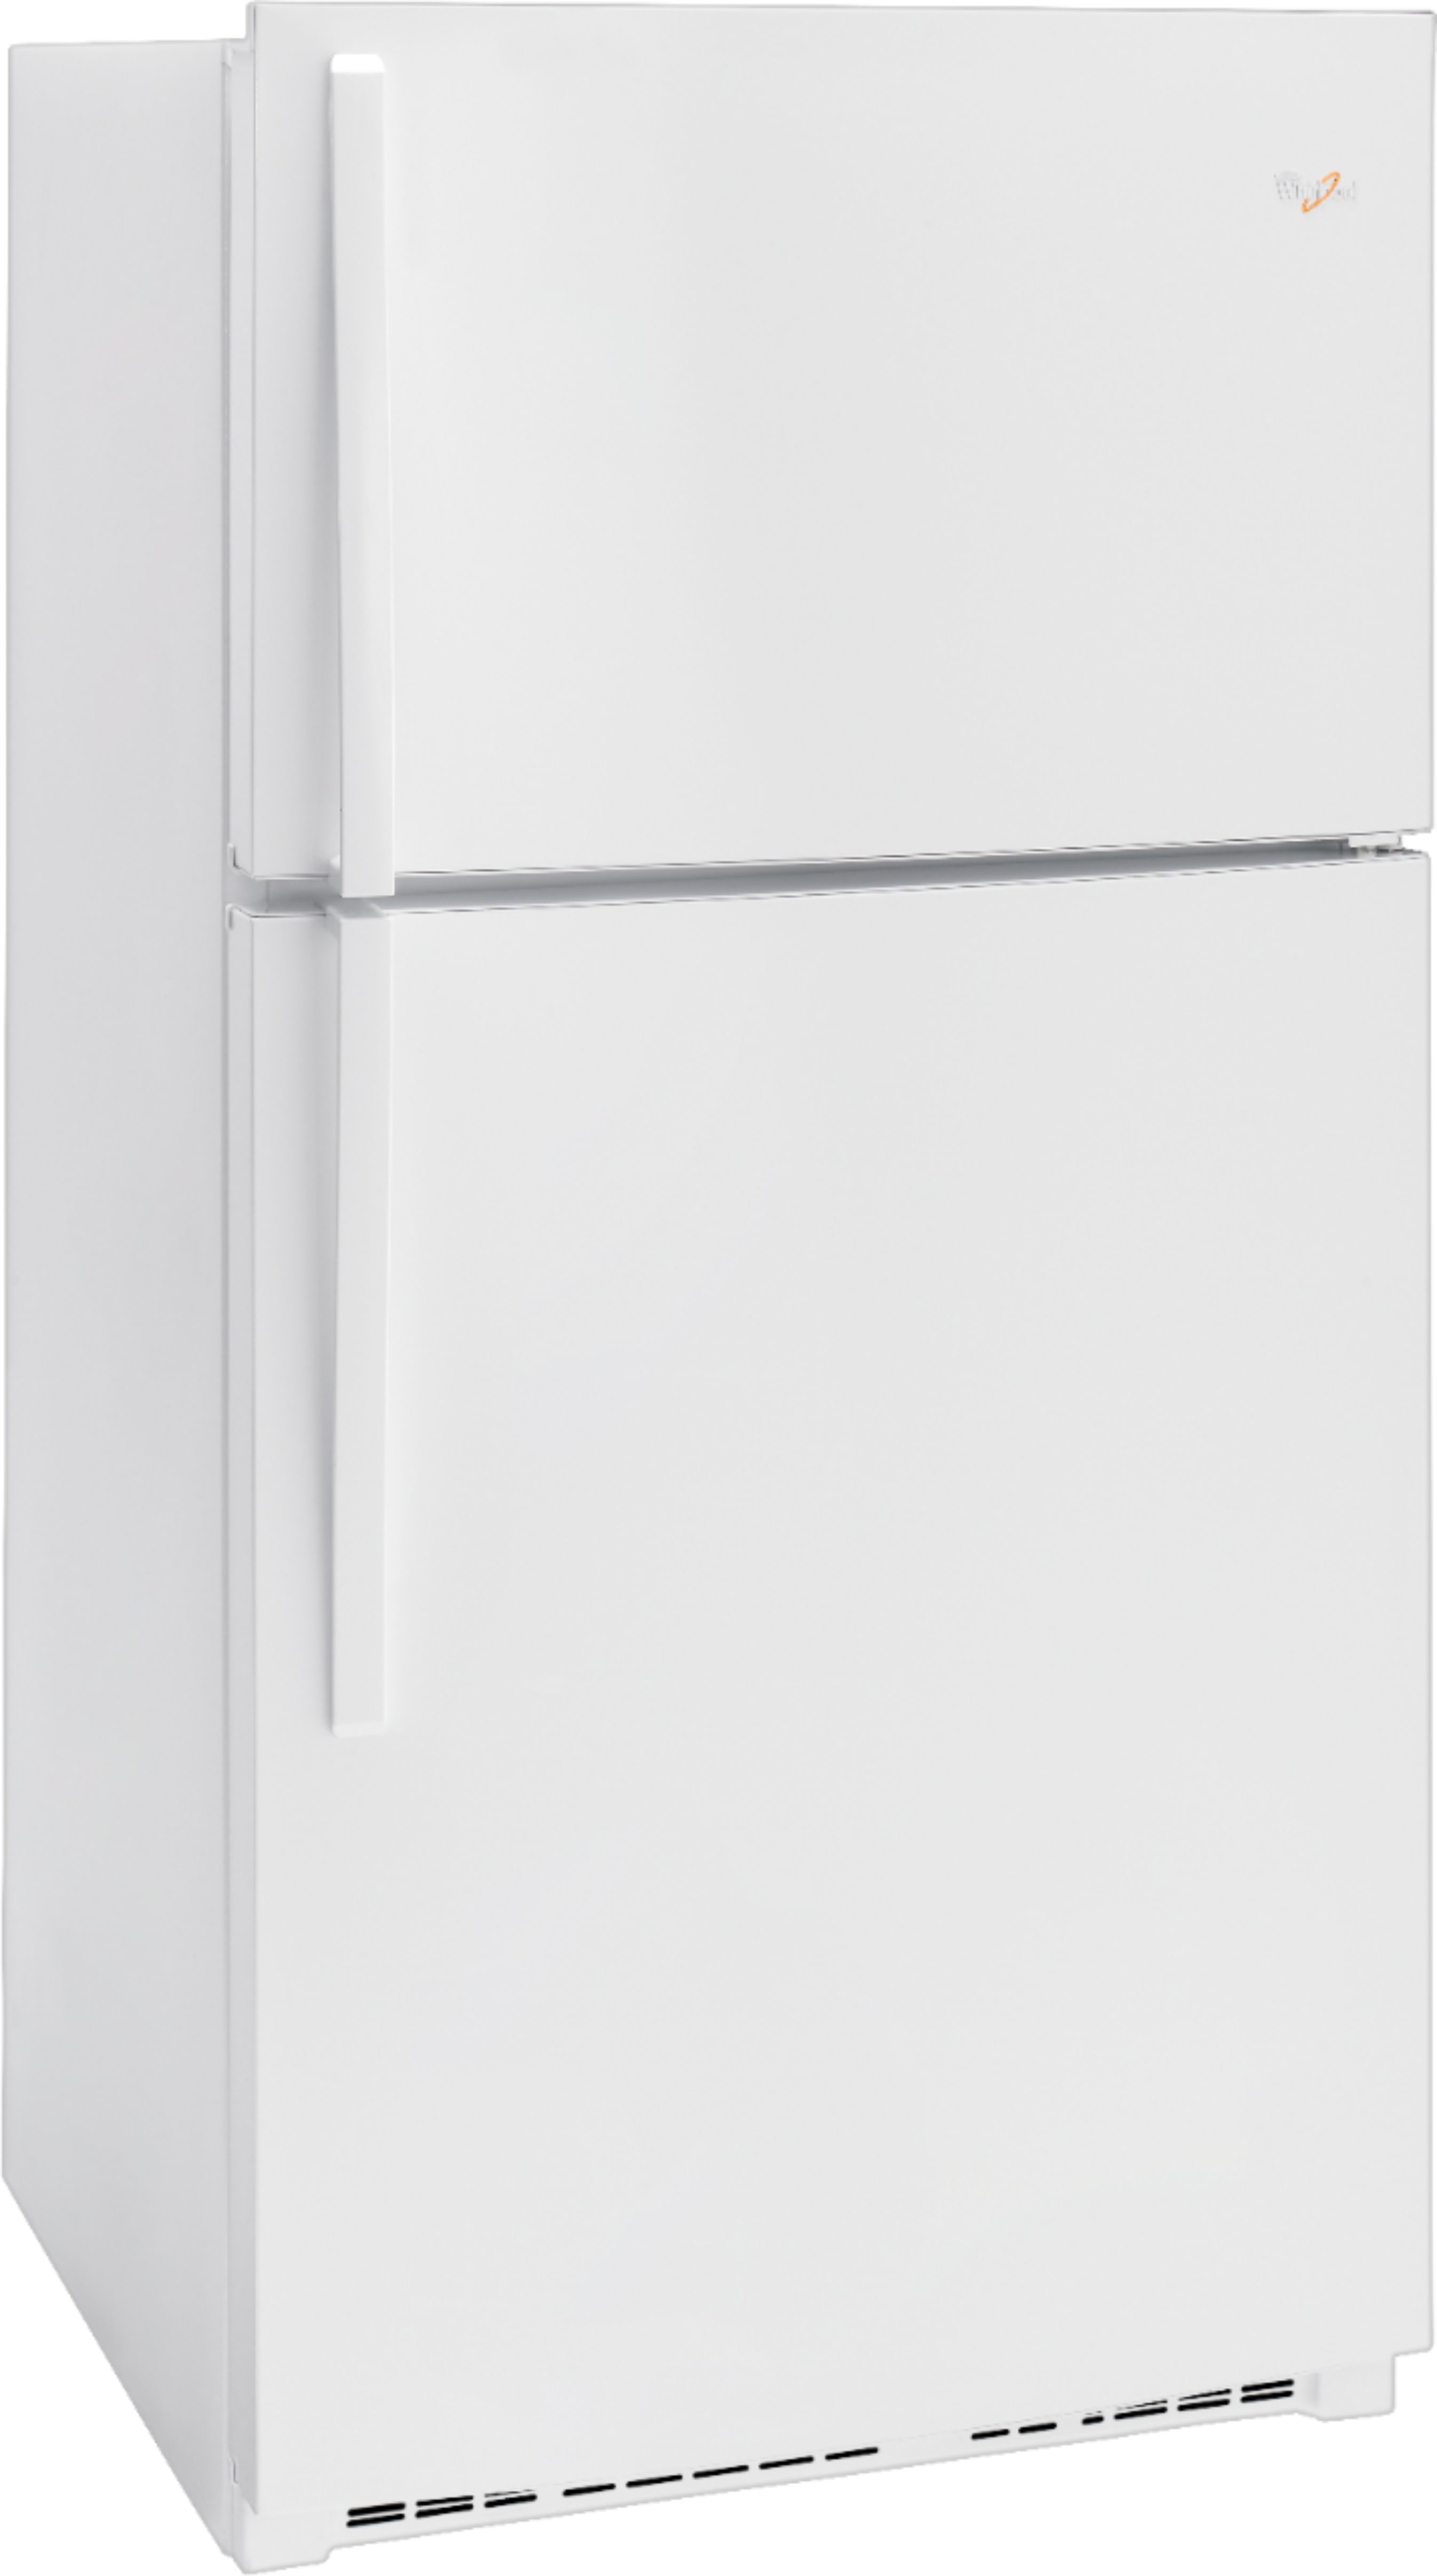 Angle View: Whirlpool - 21.3 Cu. Ft. Top-Freezer Refrigerator - Monochromatic Stainless Steel